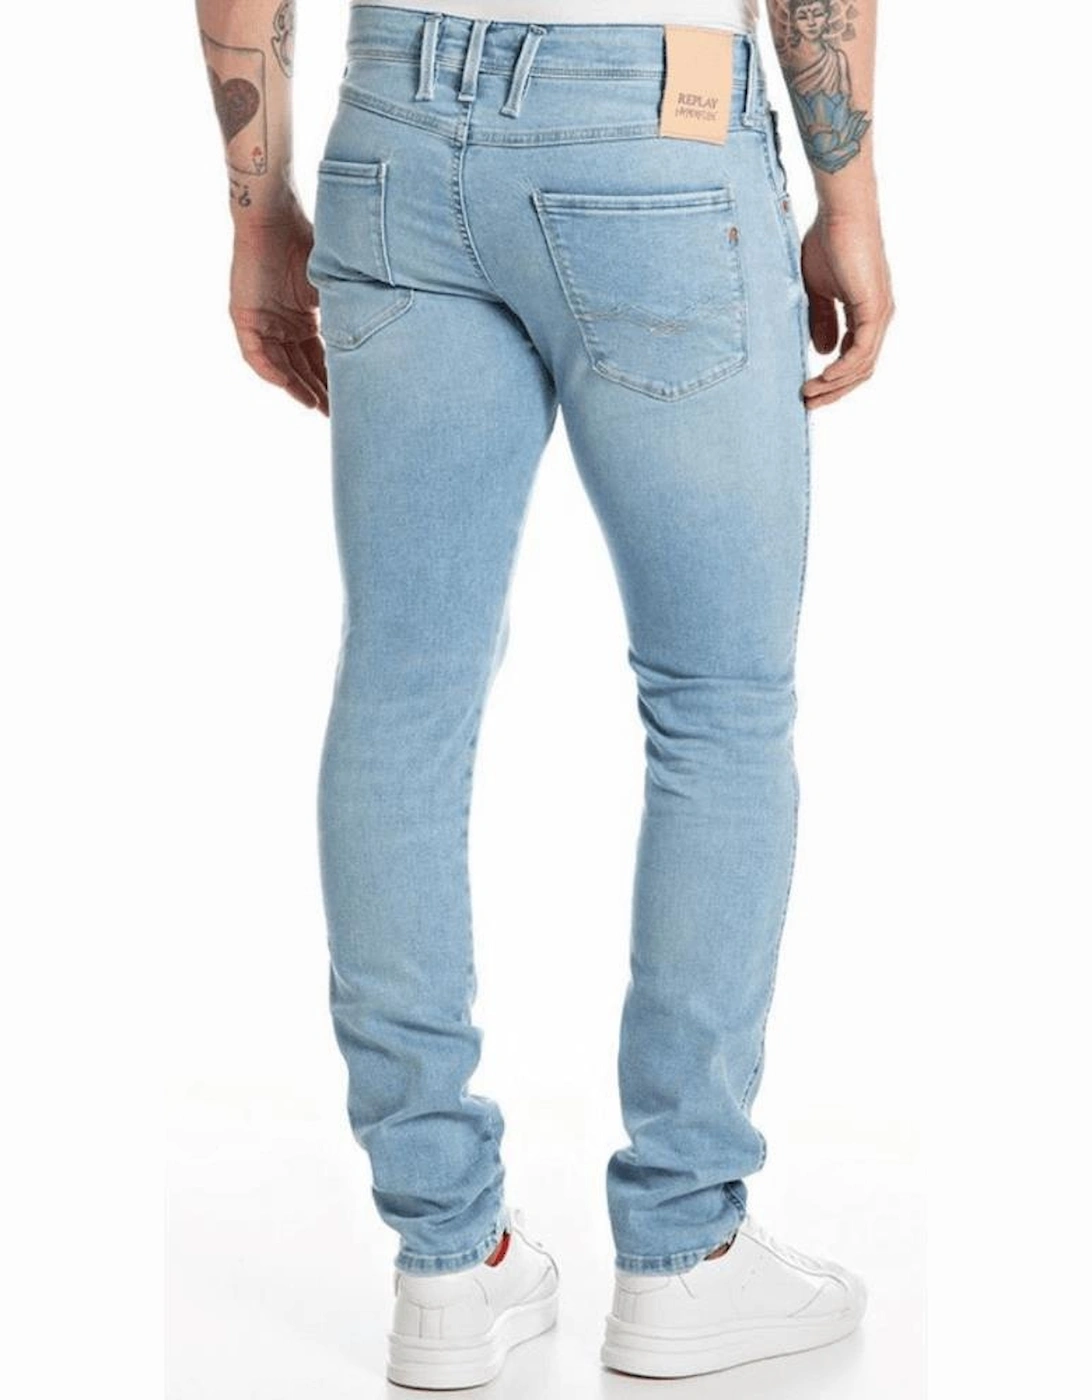 Anbass Distressed Light Wash Slim Fit Jeans